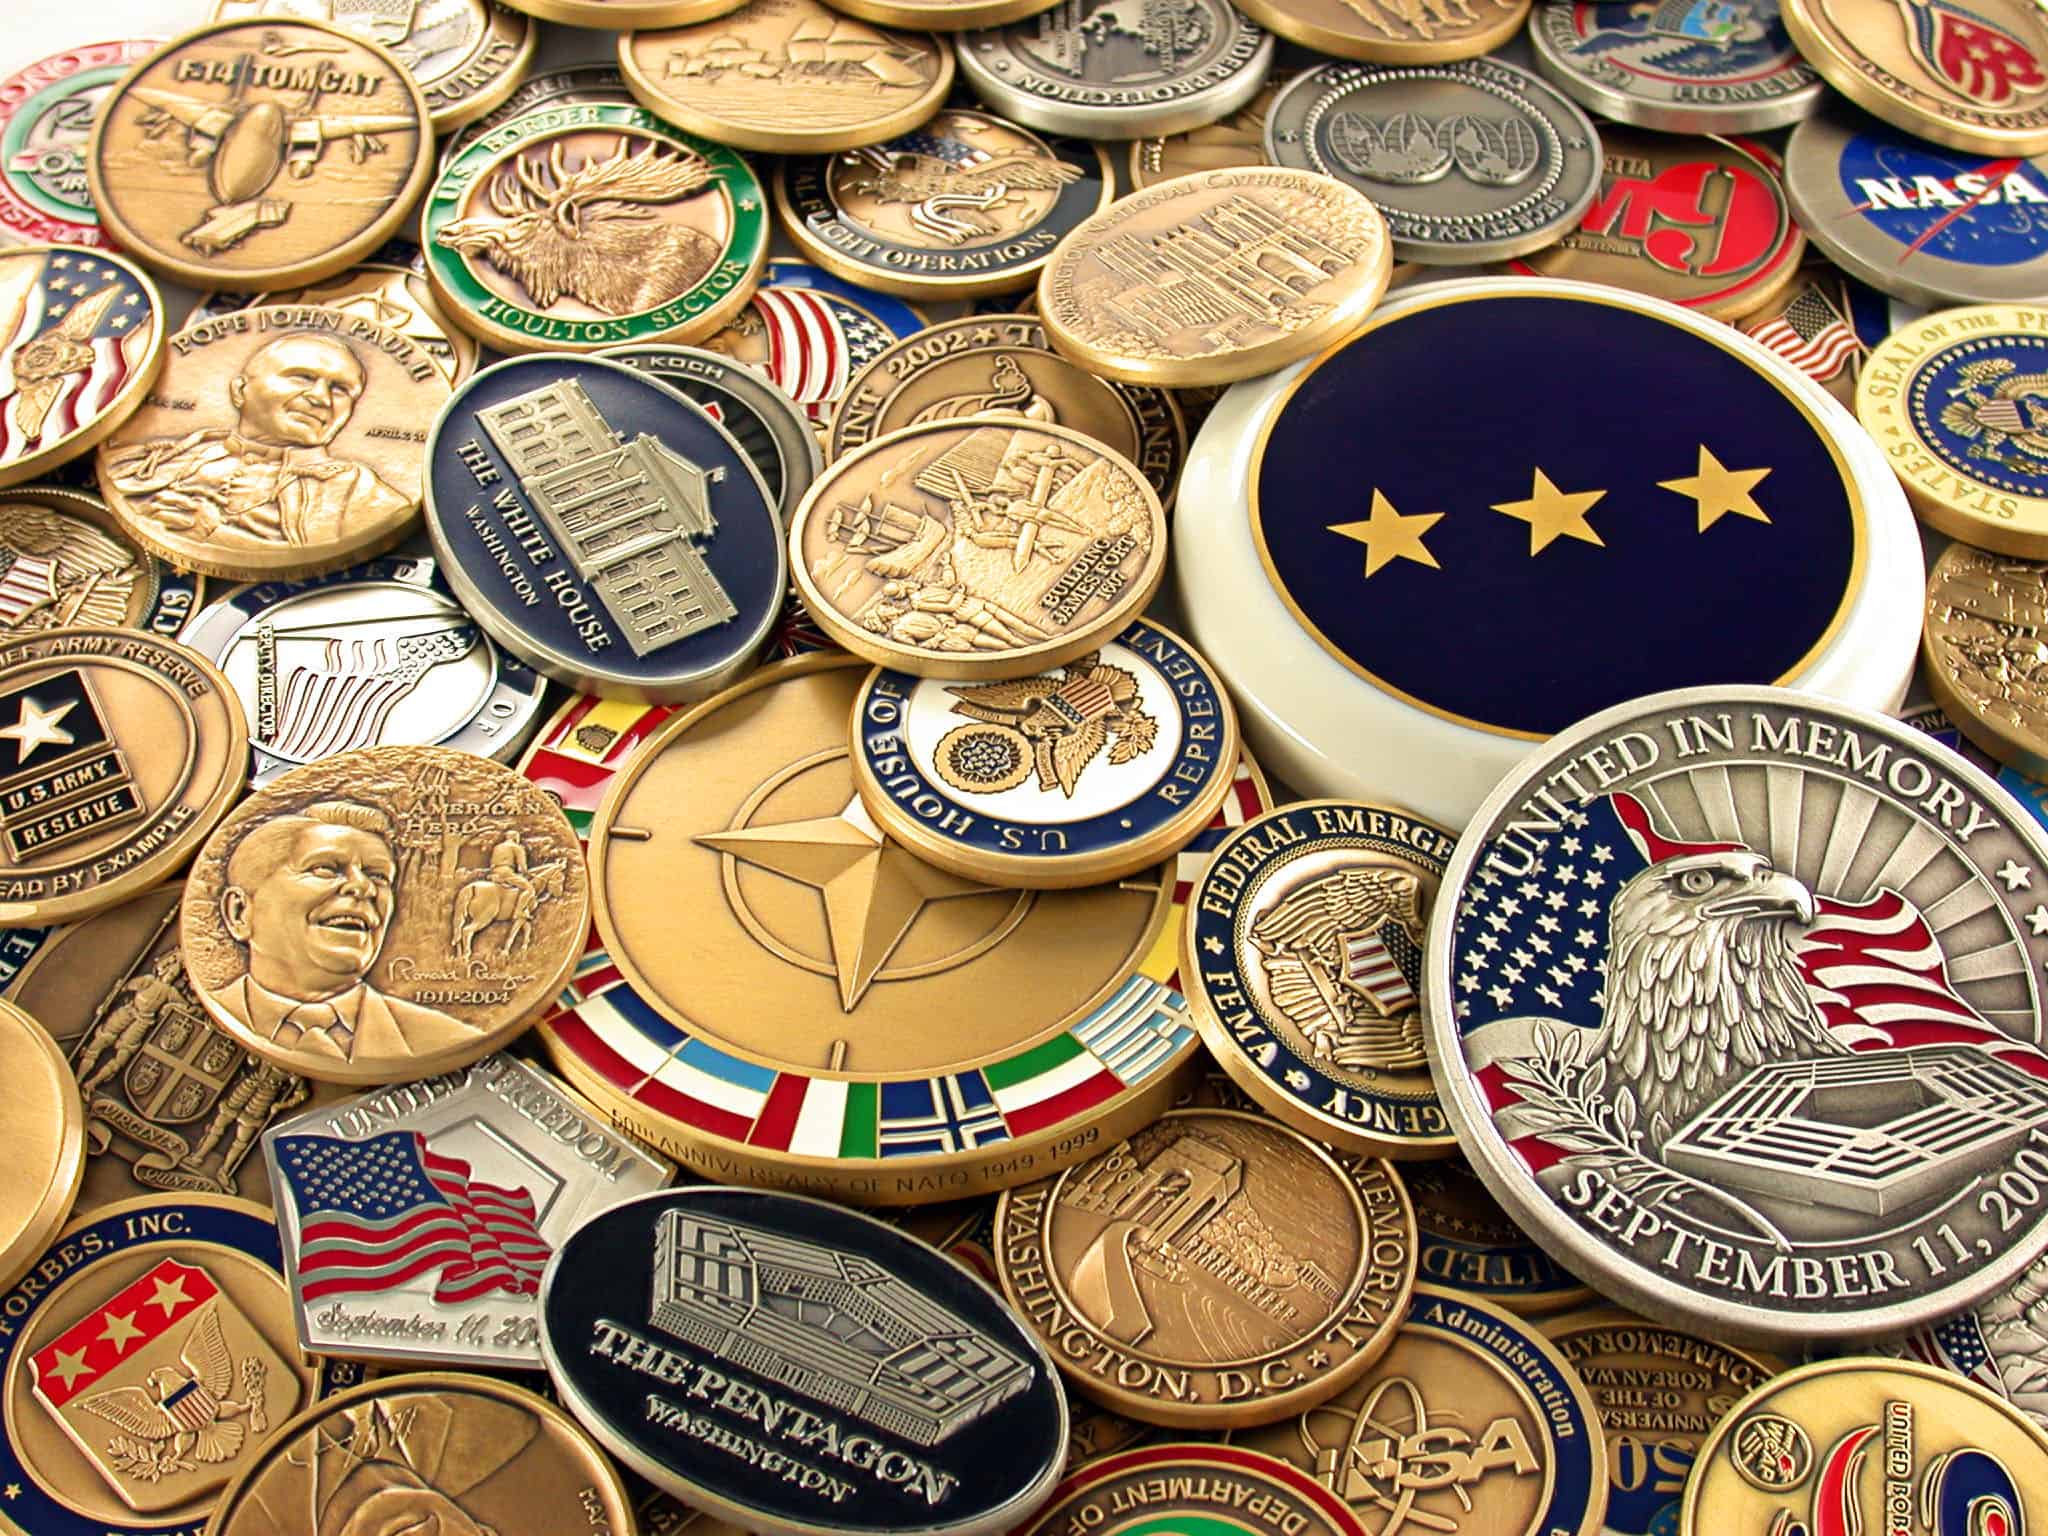 A collection of different types of custom challenge coins